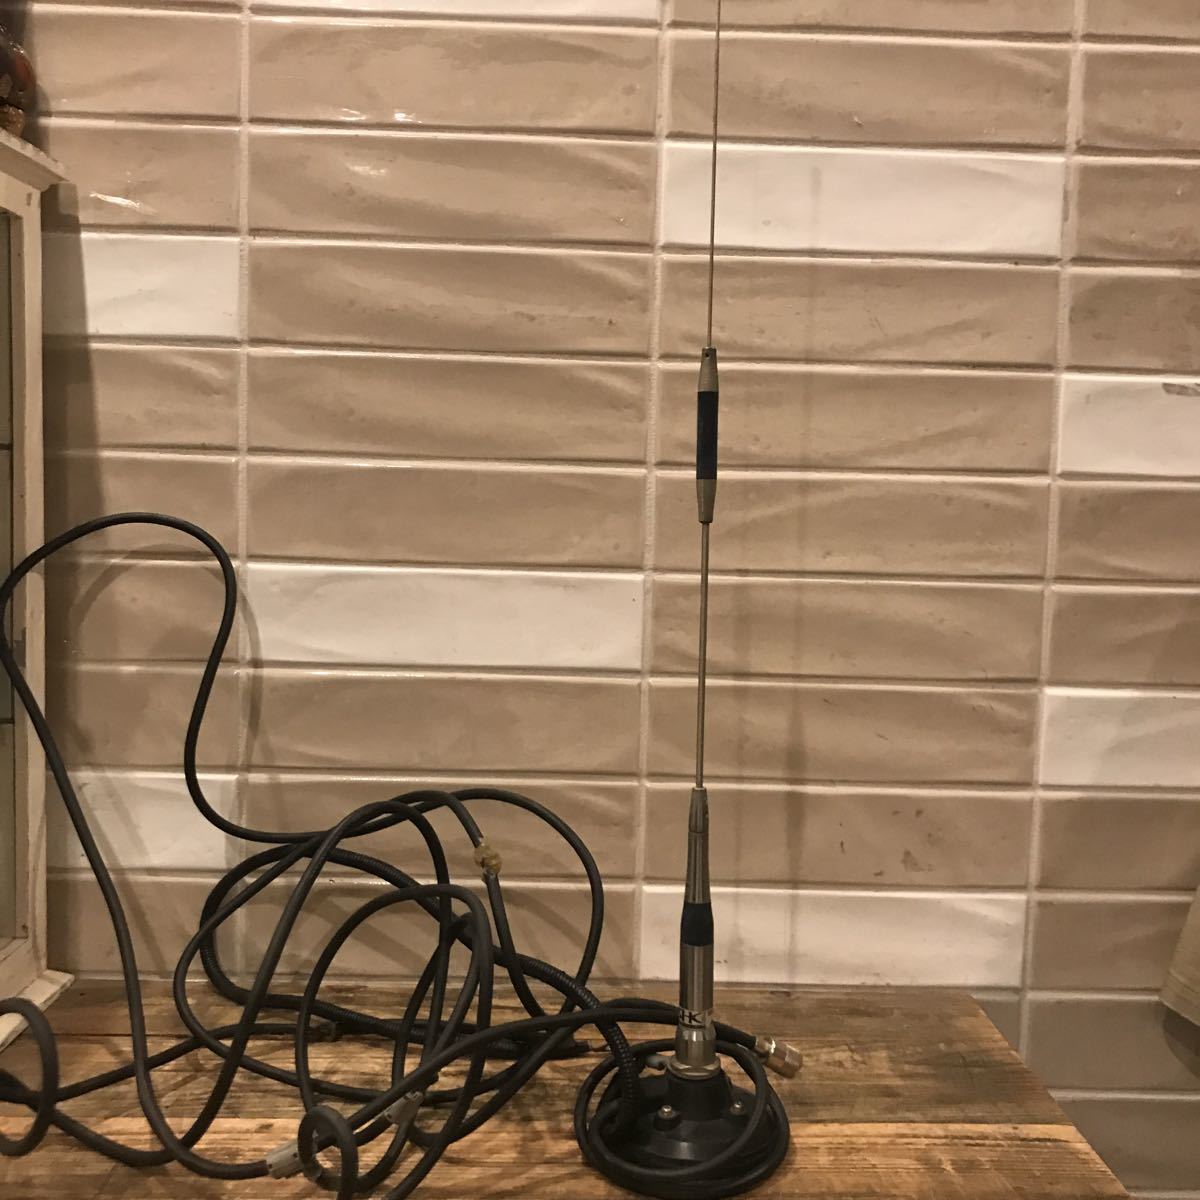 7914v Anne ton antenna SHG-700 144/430mhz my dollar not yet inspection goods present condition amateur radio? including in a package un- possible v